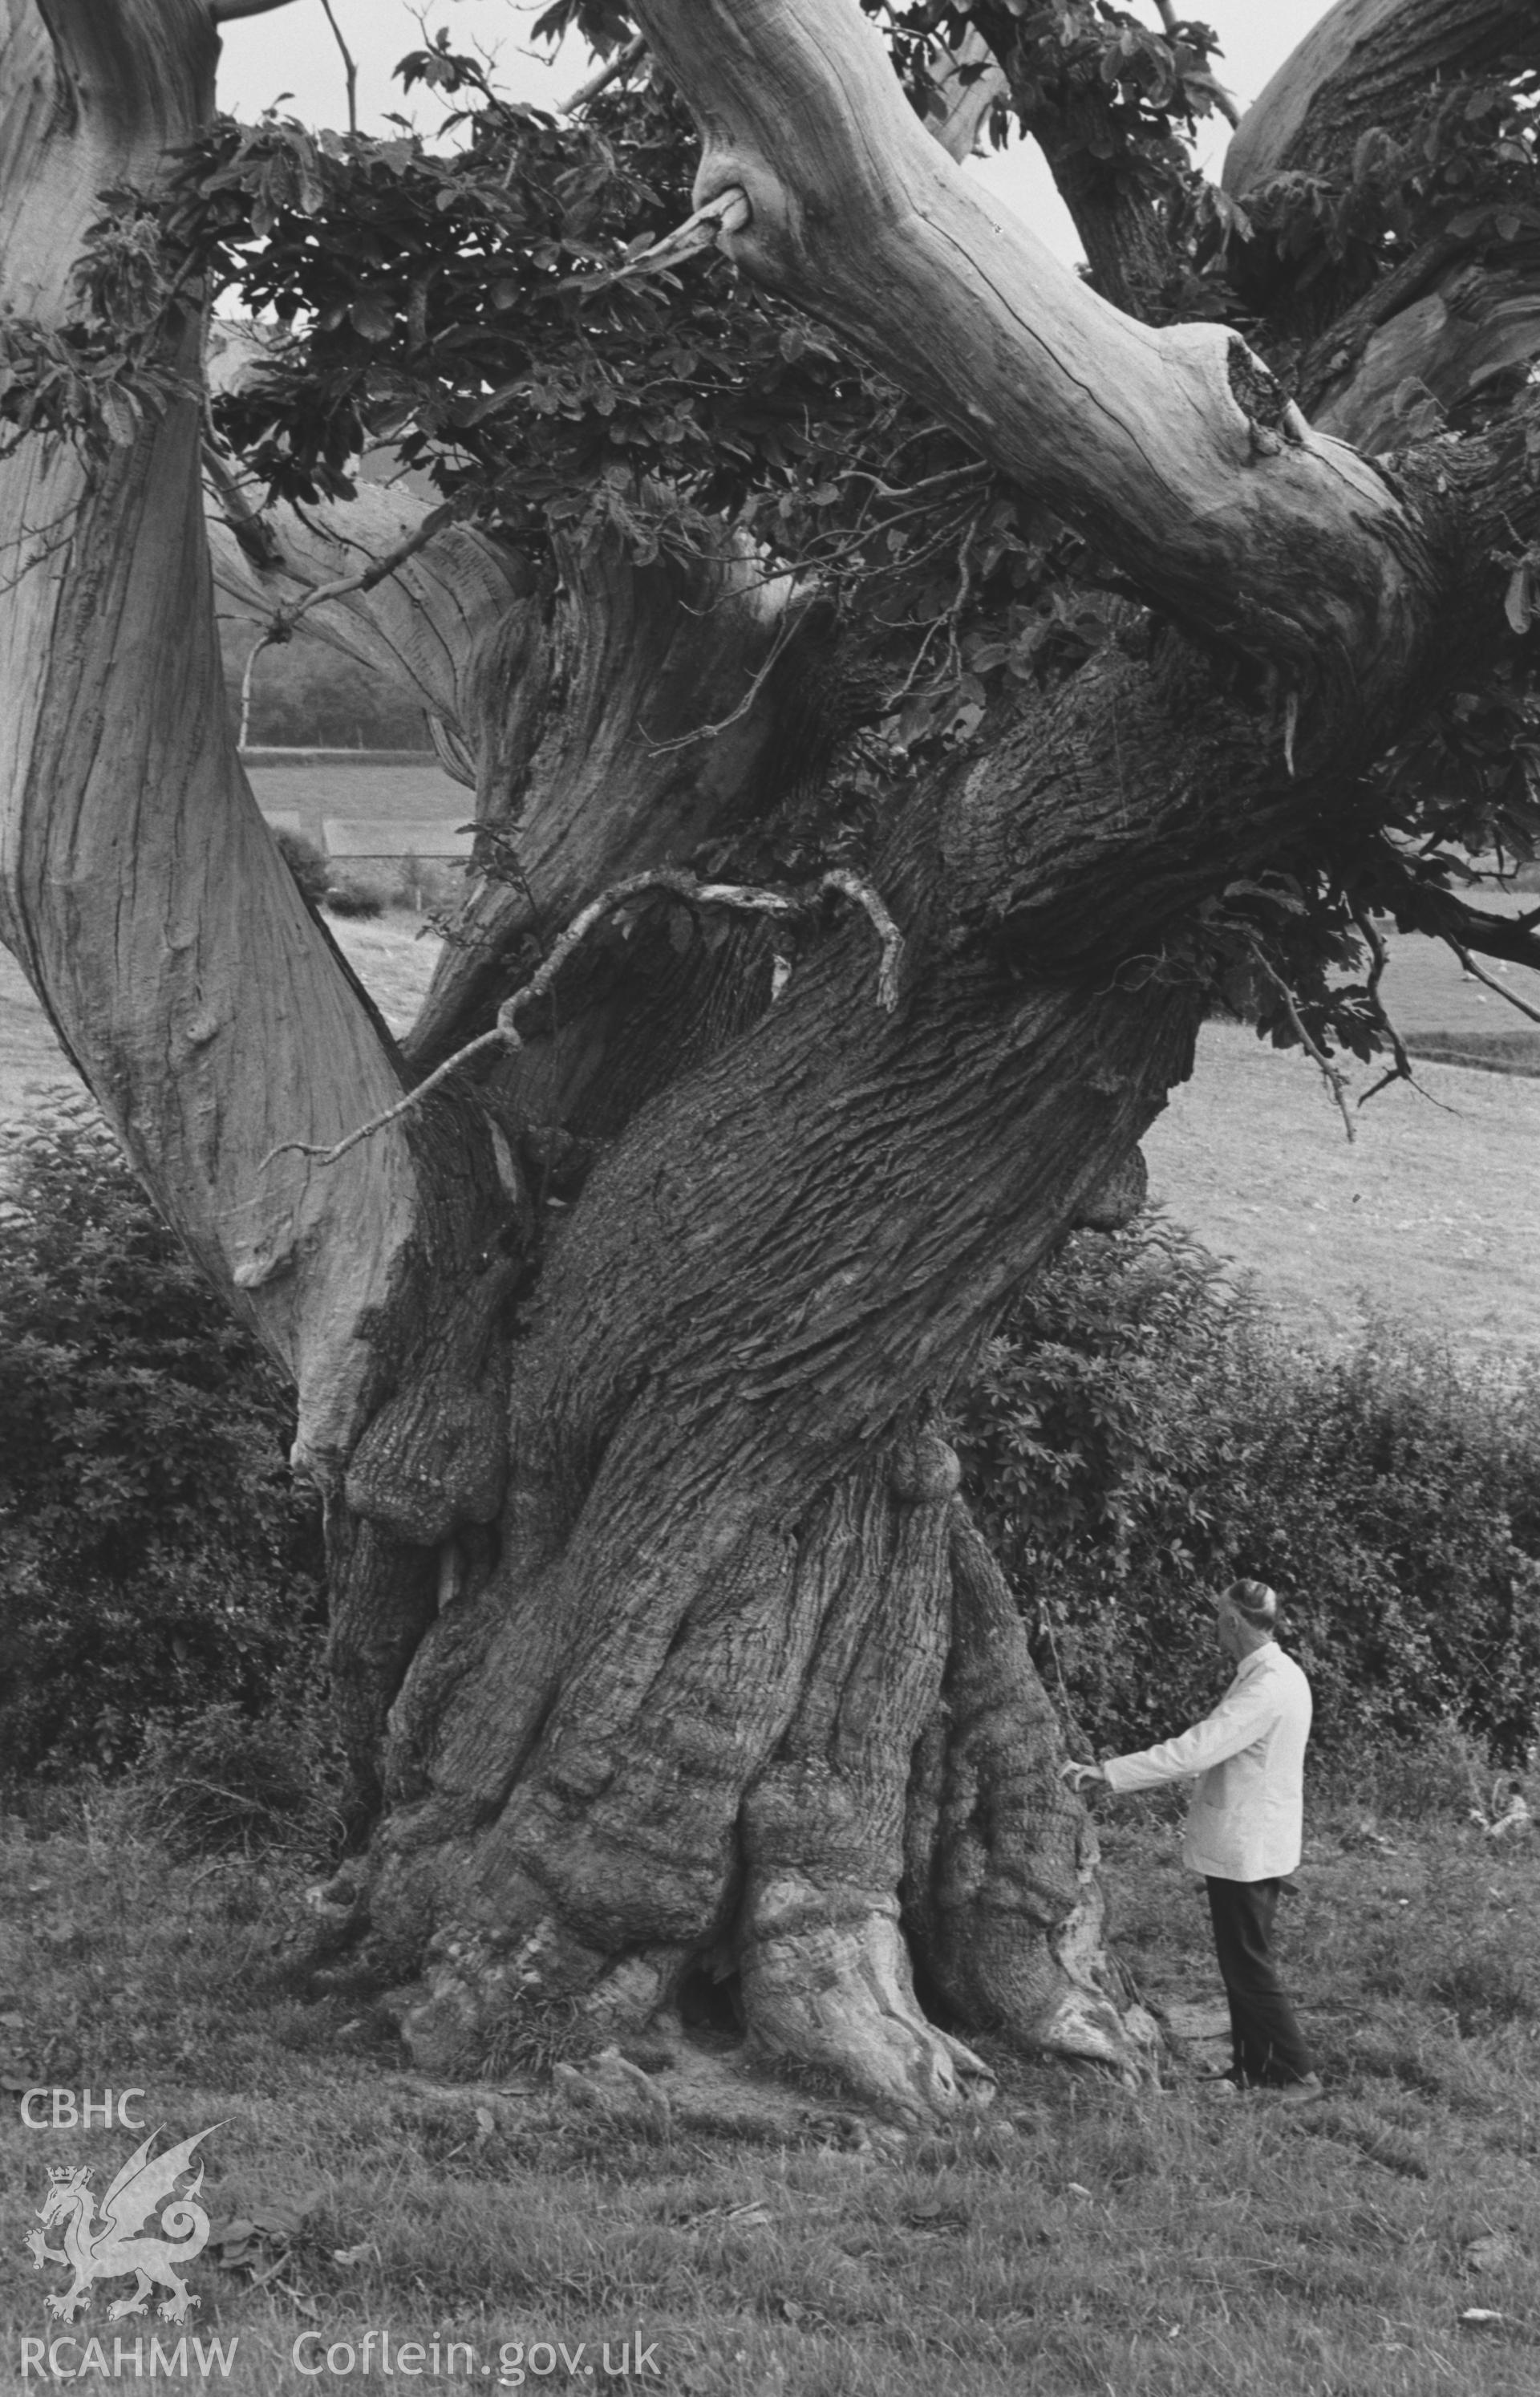 Digital copy of black & white negative showing man next to sweet chestnut tree 200m west of Dol-gwibedyn, Llanafan. Trunk measured 26ft in circumference. Photograph by Arthur O. Chater, 25th August 1967, looking south east from Grid Ref SN 681 716.